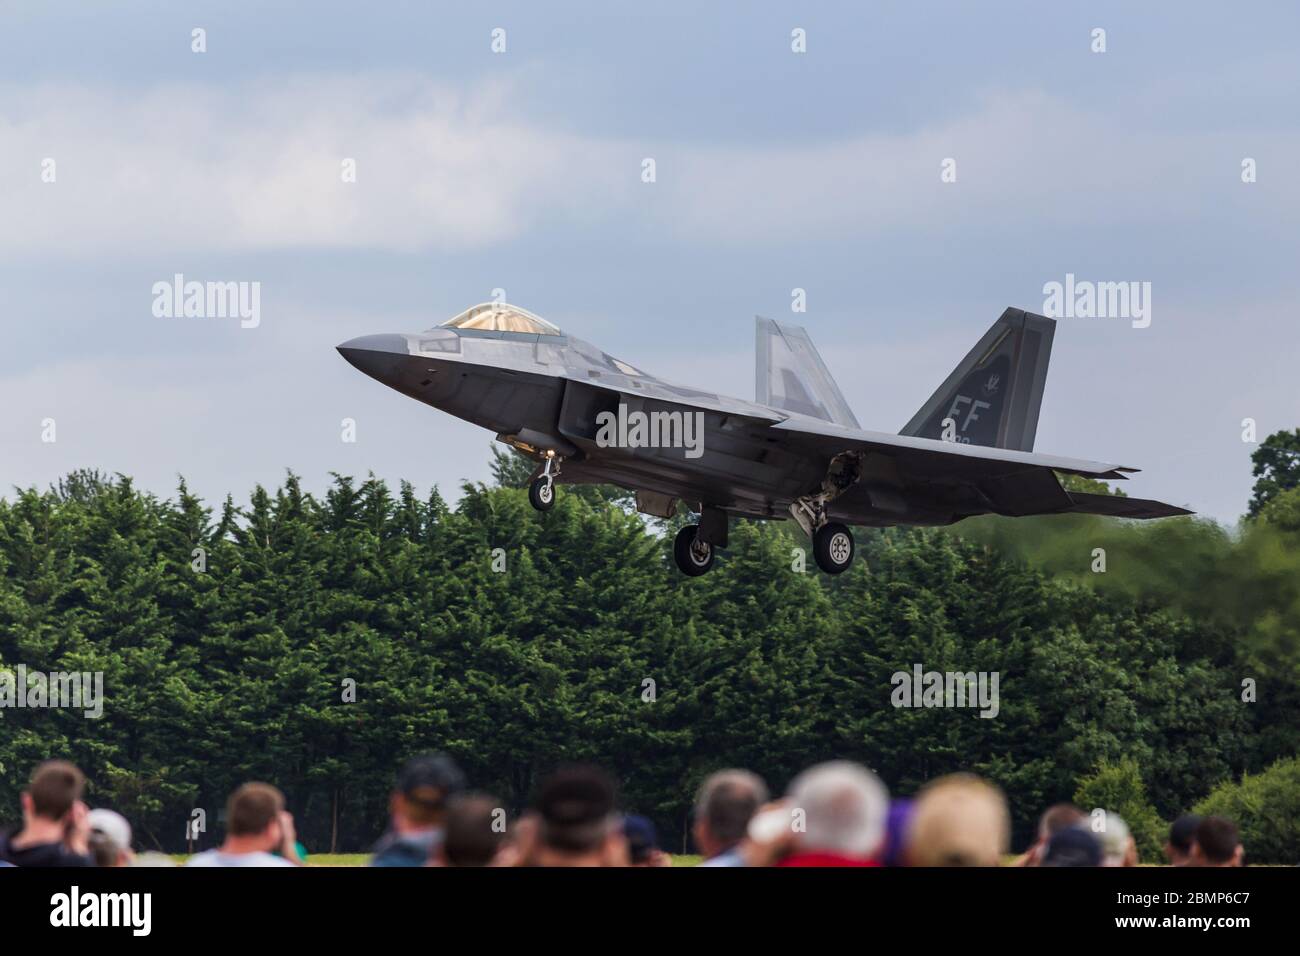 F-22a Raptor landing at RAF Fairford, Gloucestershire in July 2017. Stock Photo